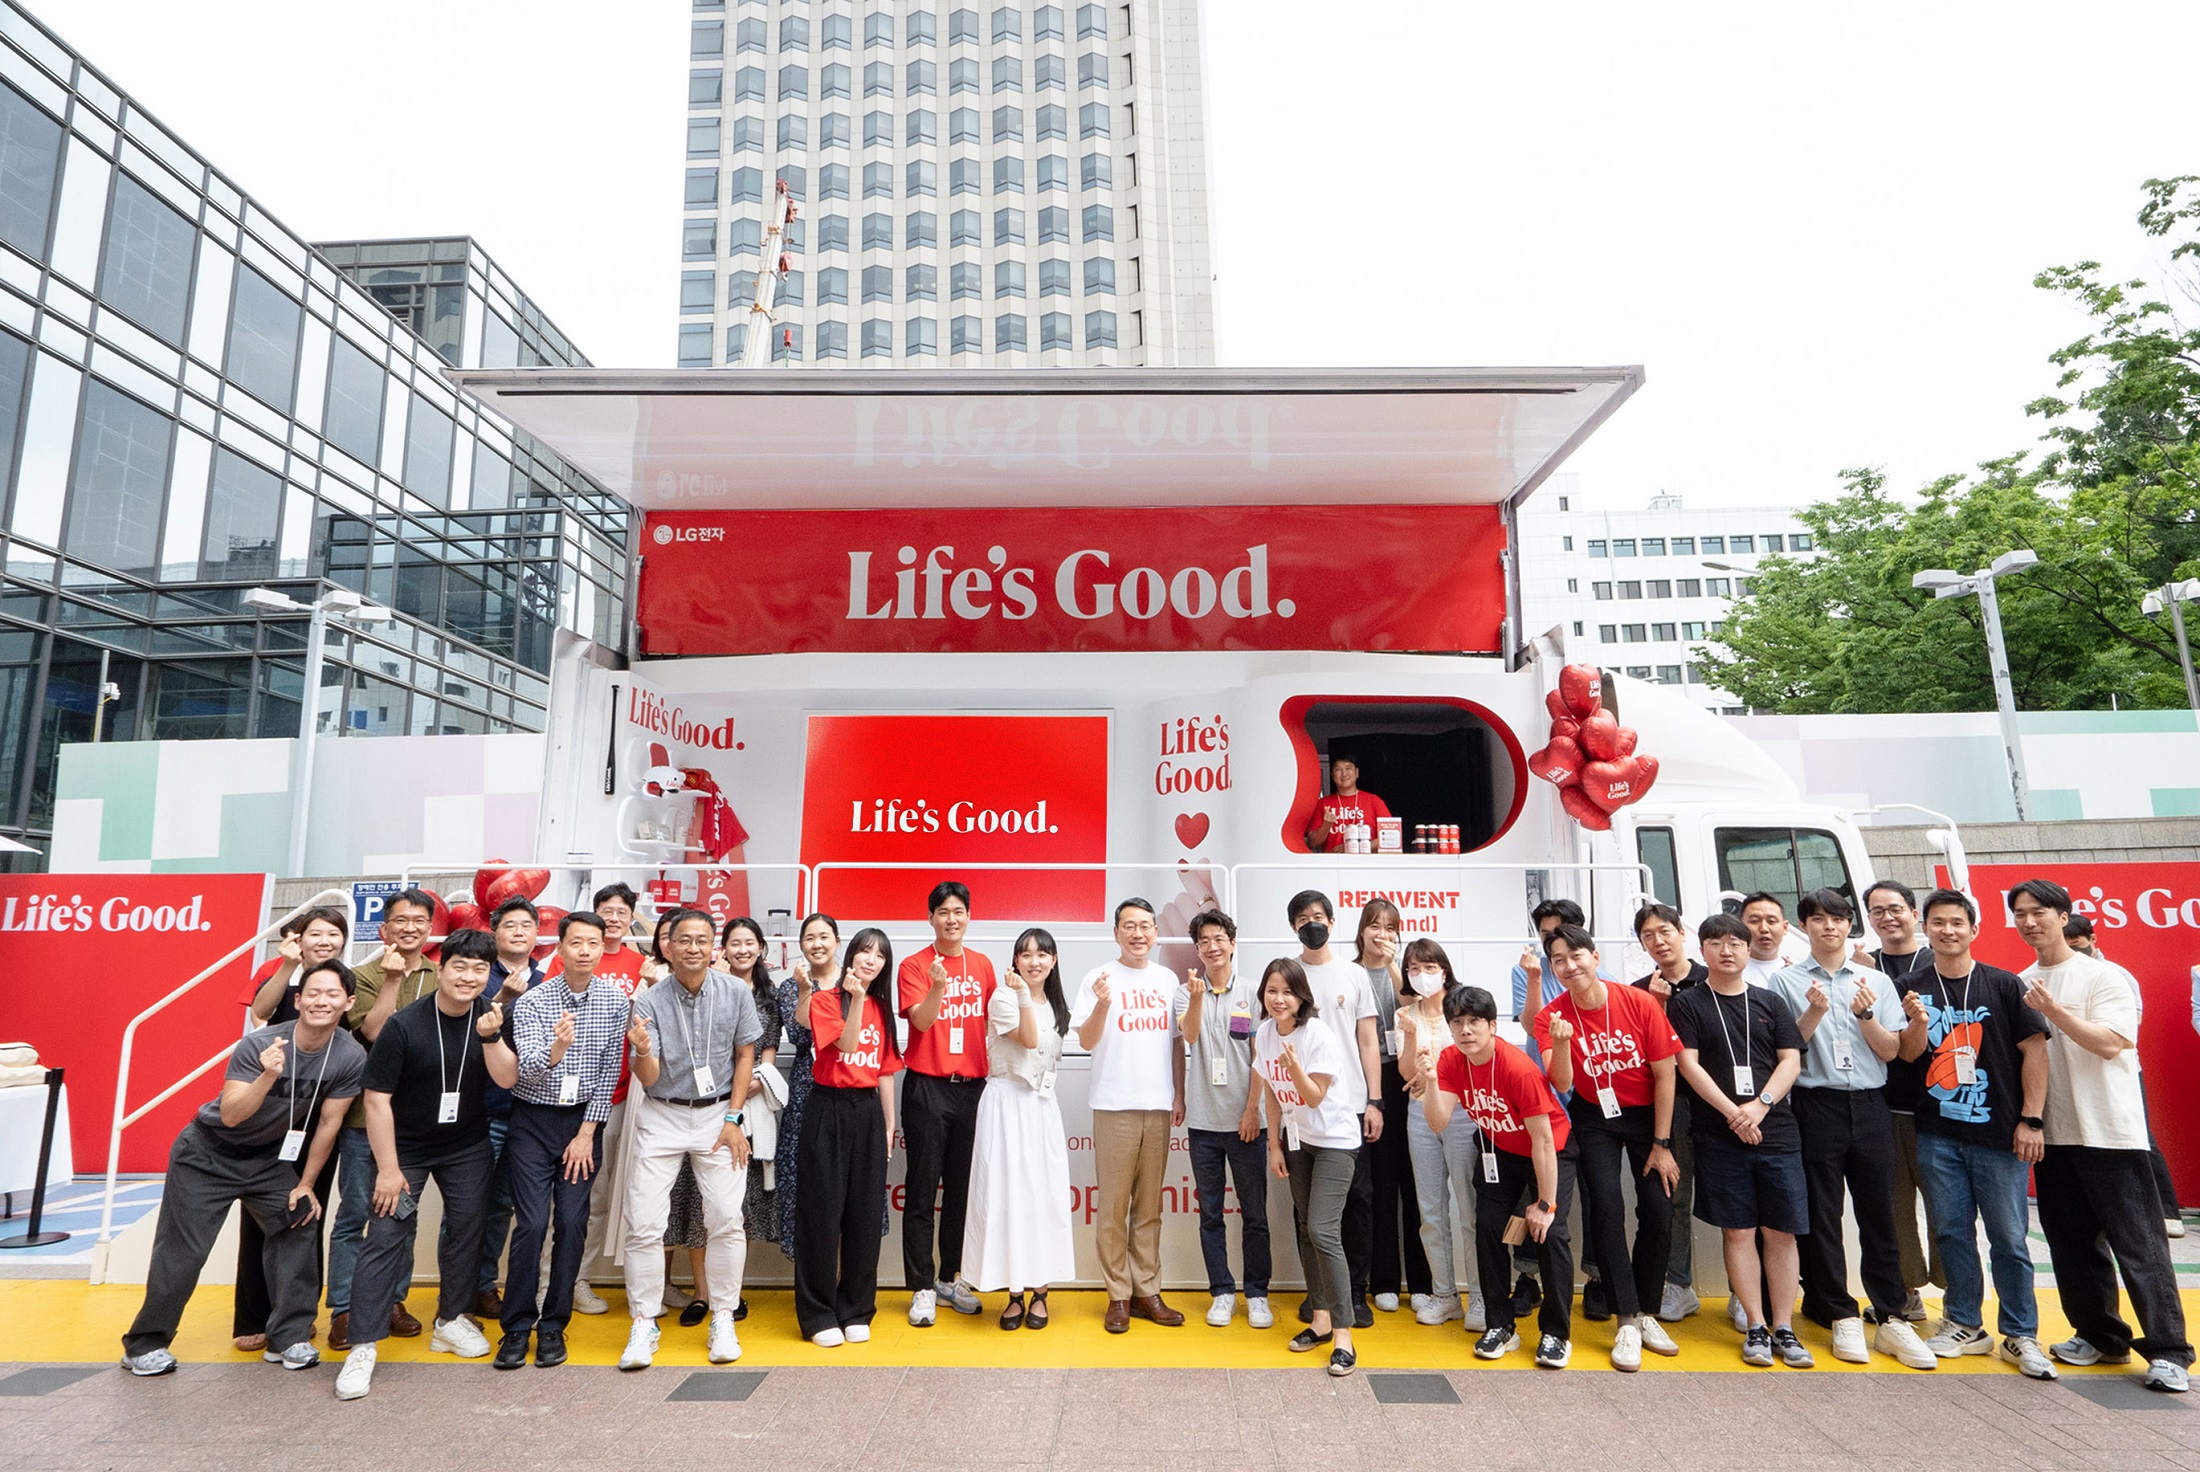 LG CEO and employees posing together for a photo in front to the Life's Good event truck